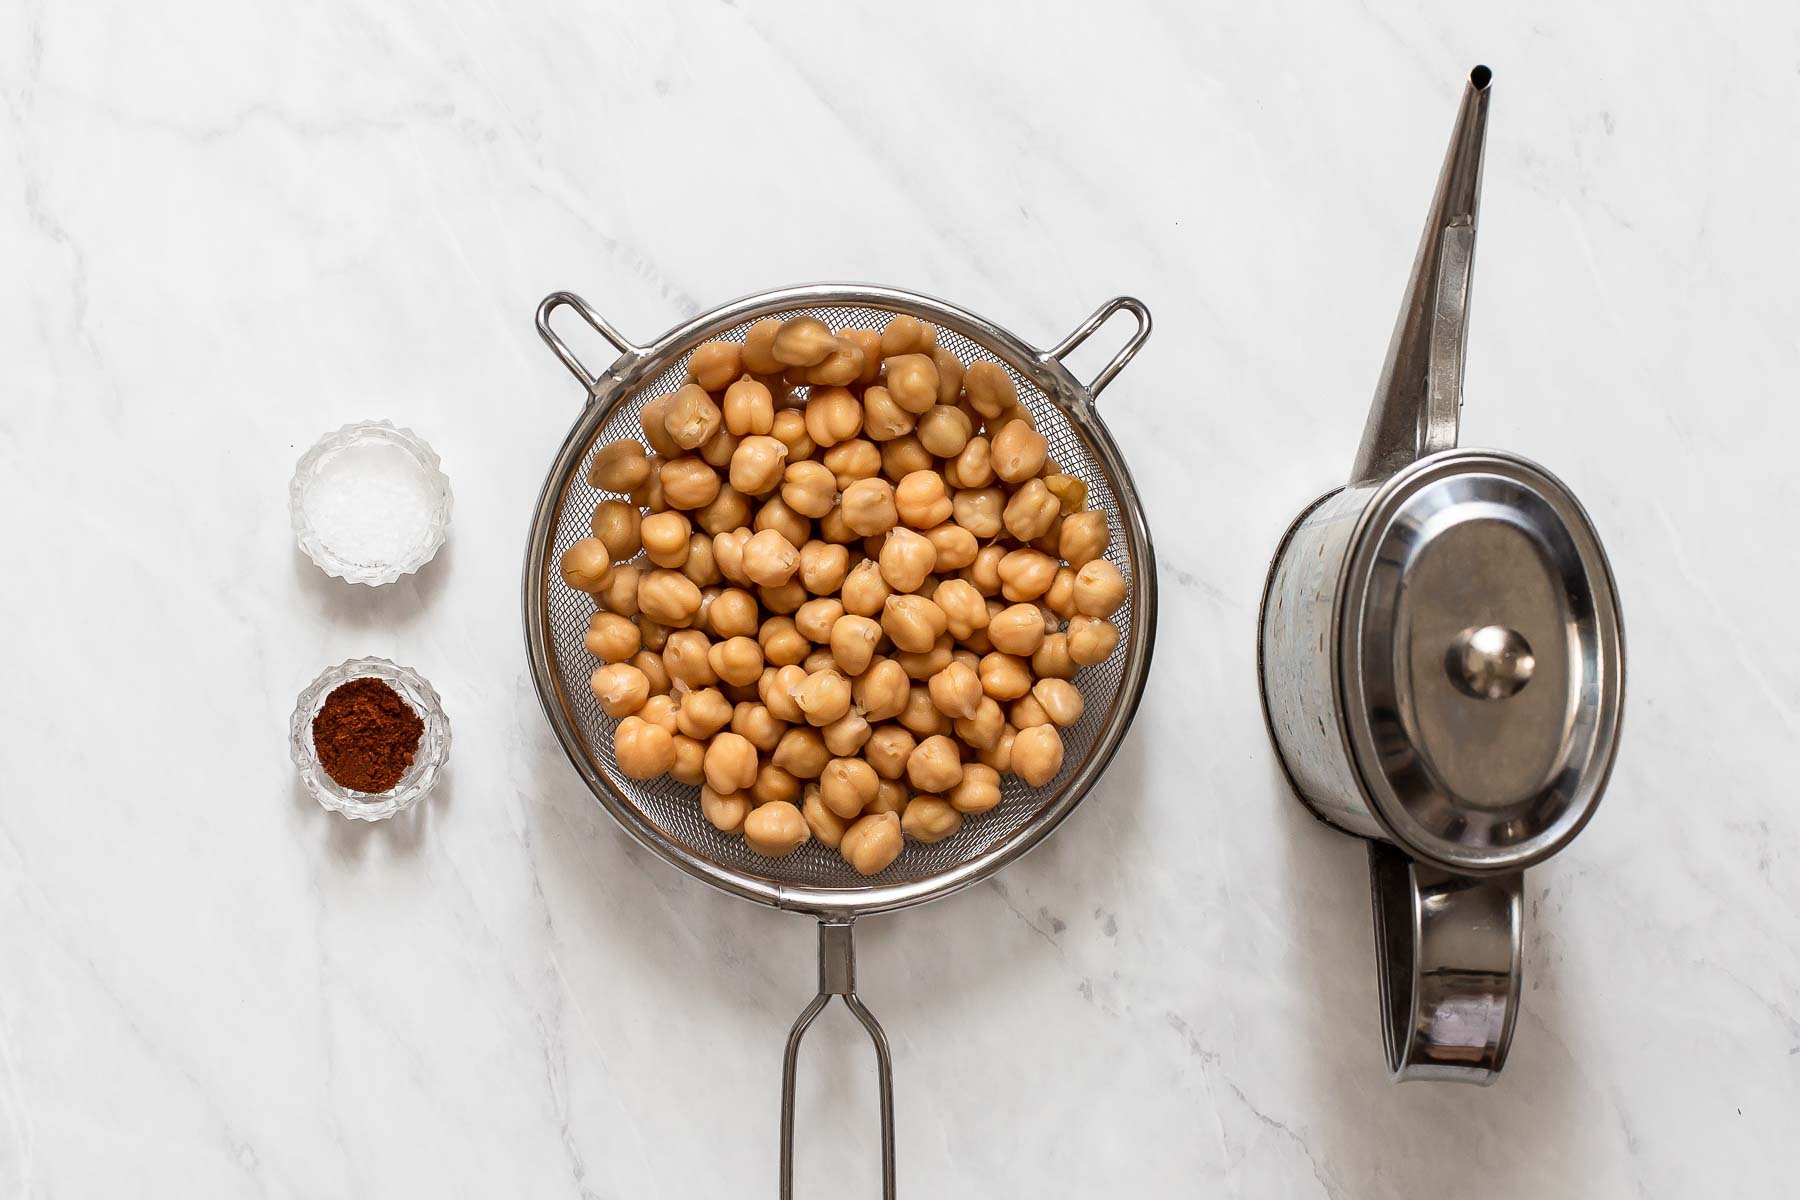 Ingredients for making roasted chickpeas.